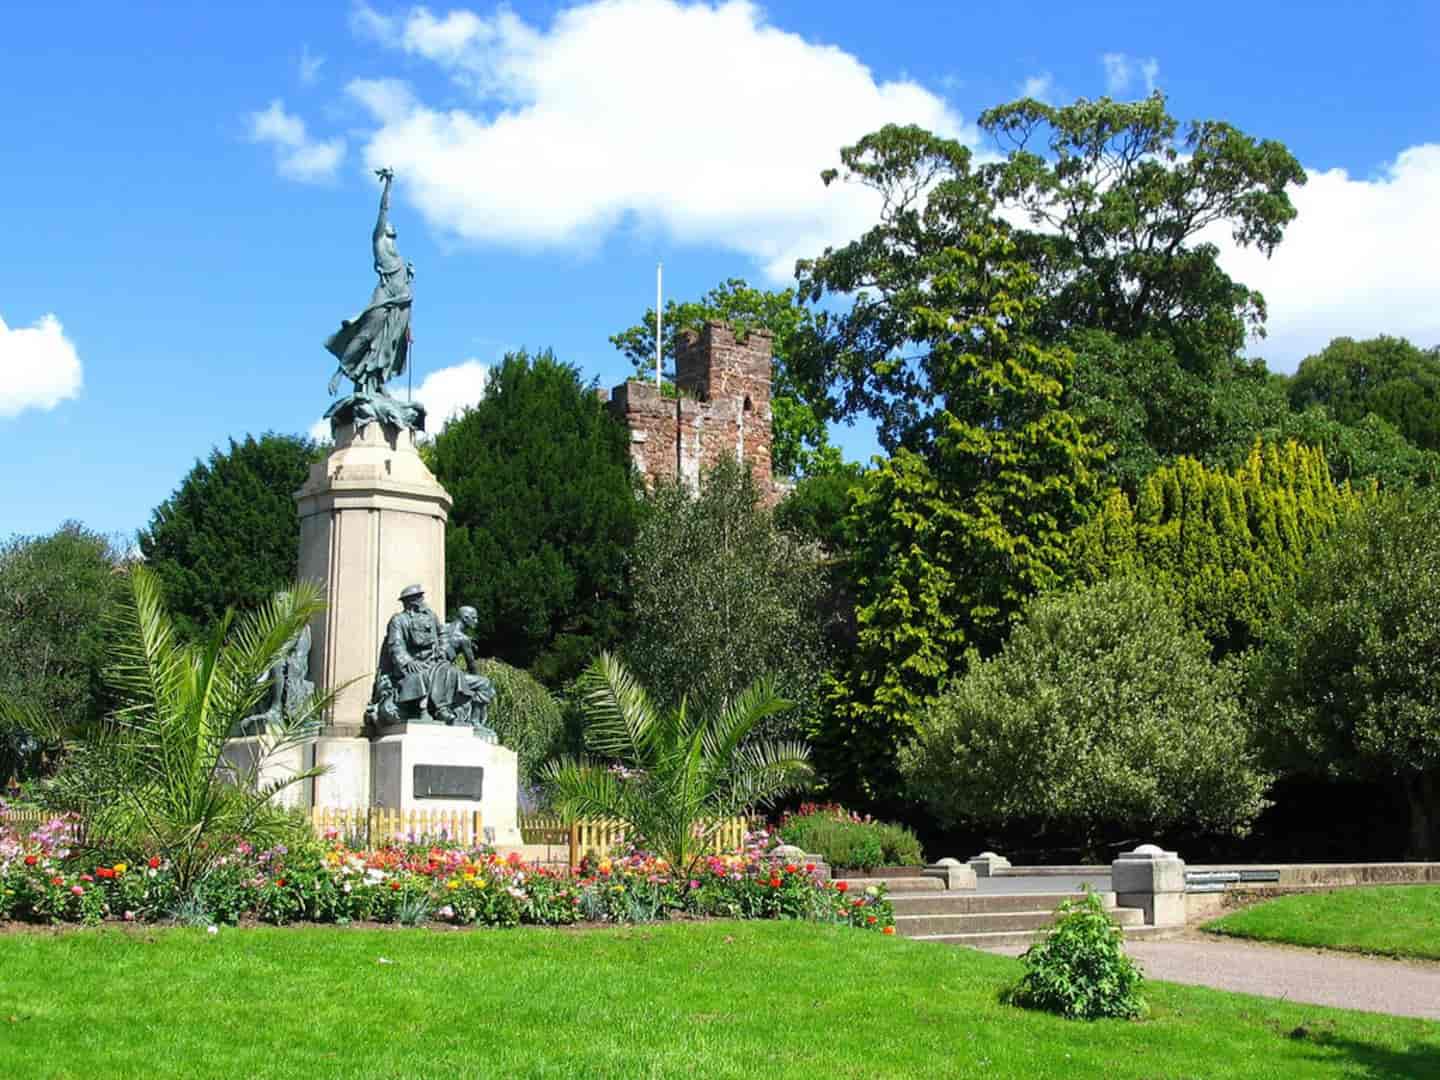 Student Accommodation in Exeter - The Northernhay War Memorial